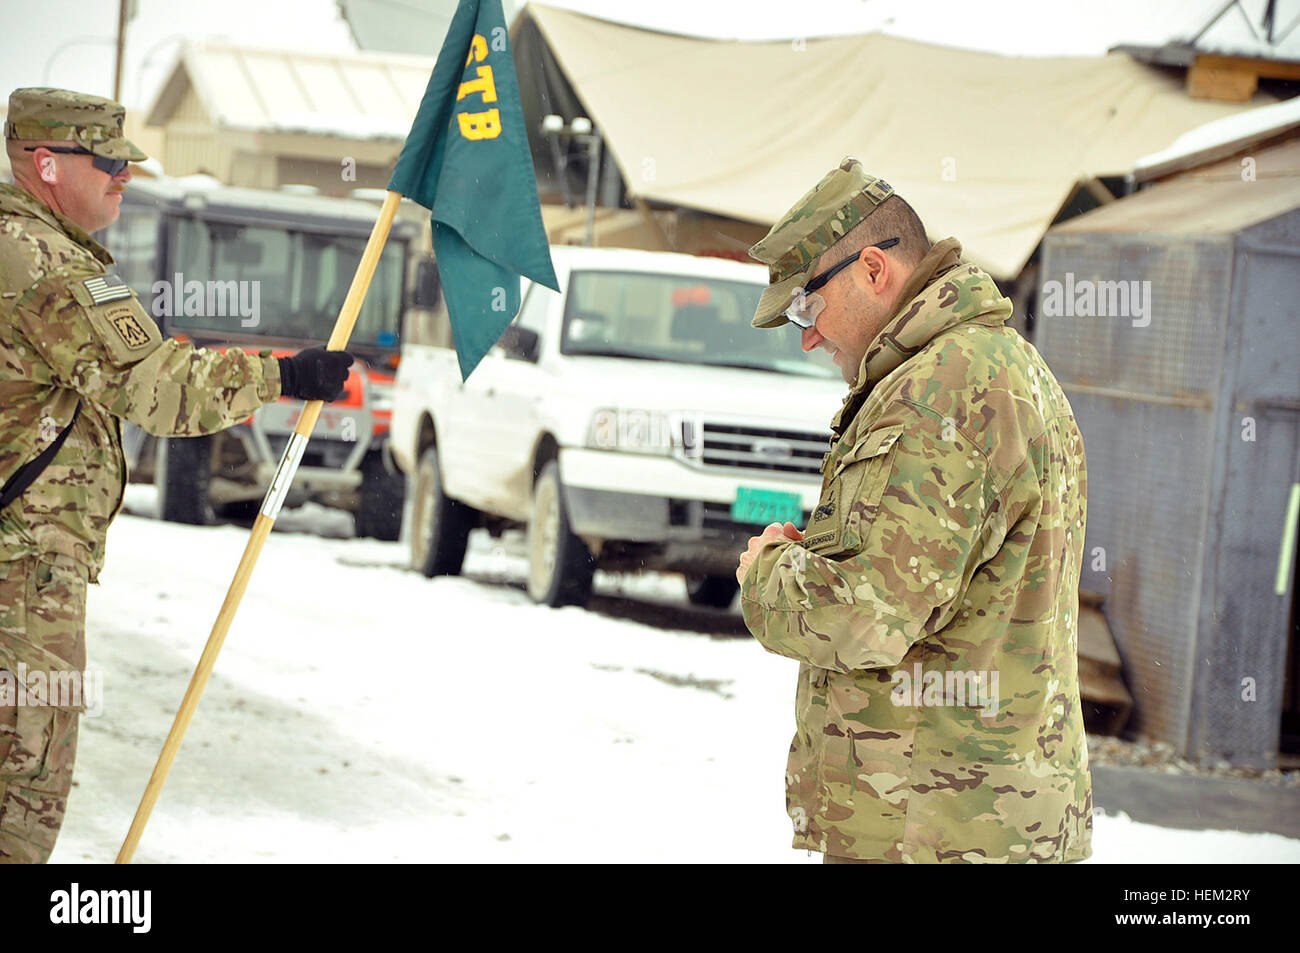 LOGAR PROVINCE, Afghanistan – Lt. Col. Matthew Ingram (right) the 3-1 Special Troops Battalion speaks to his Headquarters and Headquarters Company, prior to awarding combat badges to Soldiers assigned to the company at Forward Operating Base Shank. Ingram, the STB commander, told the troops, “We are making a difference and I hope you all see that, I am proud of every one of you and what you are doing.” (U.S. Army Photo by: Sgt. John D. Ortiz) After facing combat, soldiers receive recognition 528652 Stock Photo